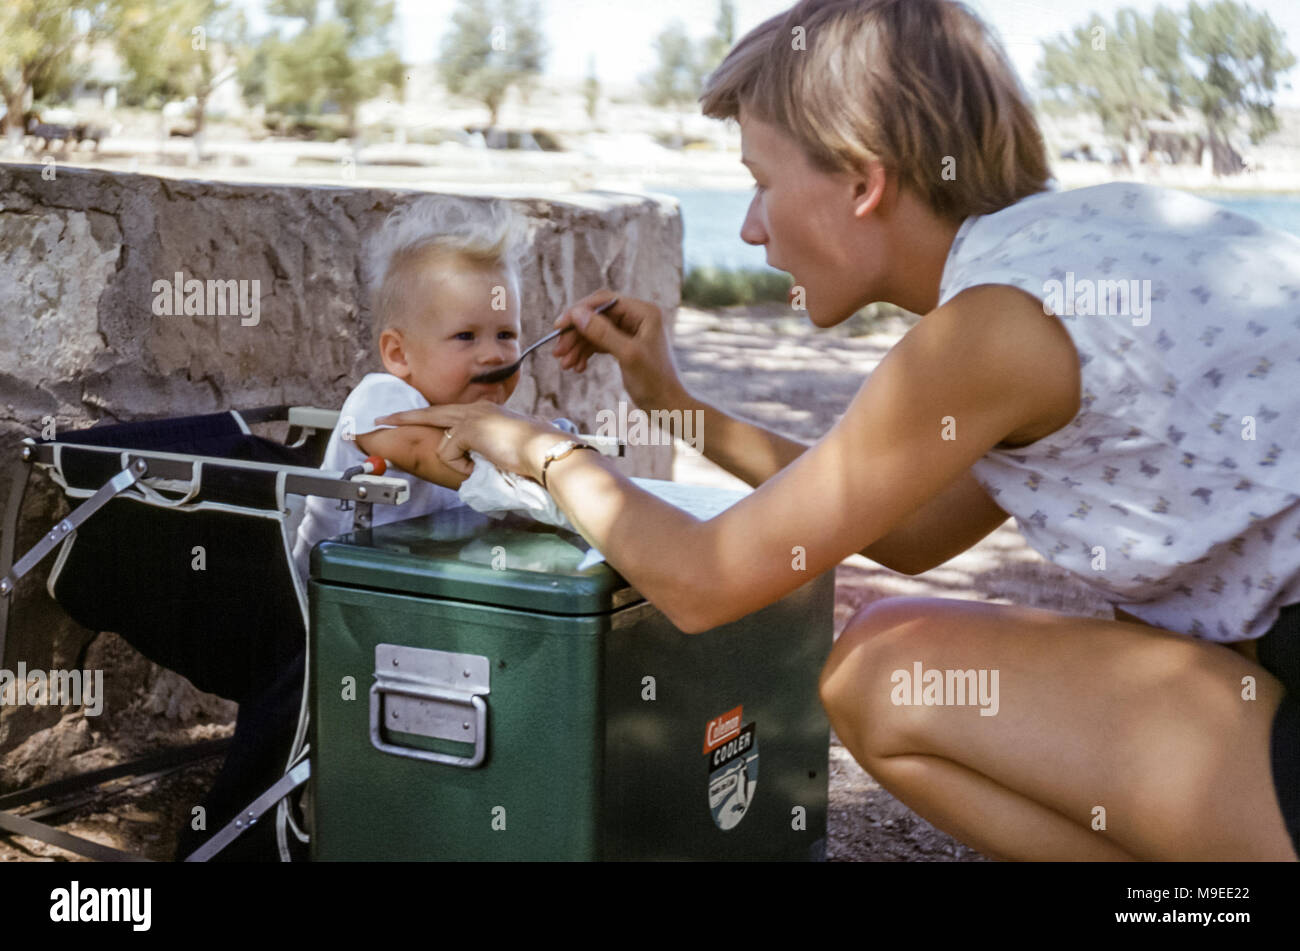 Attractive young woman feeding a 7 to 8 month old baby girl at a campsite in USA in the 1950s with a large green metal camping cooler Stock Photo